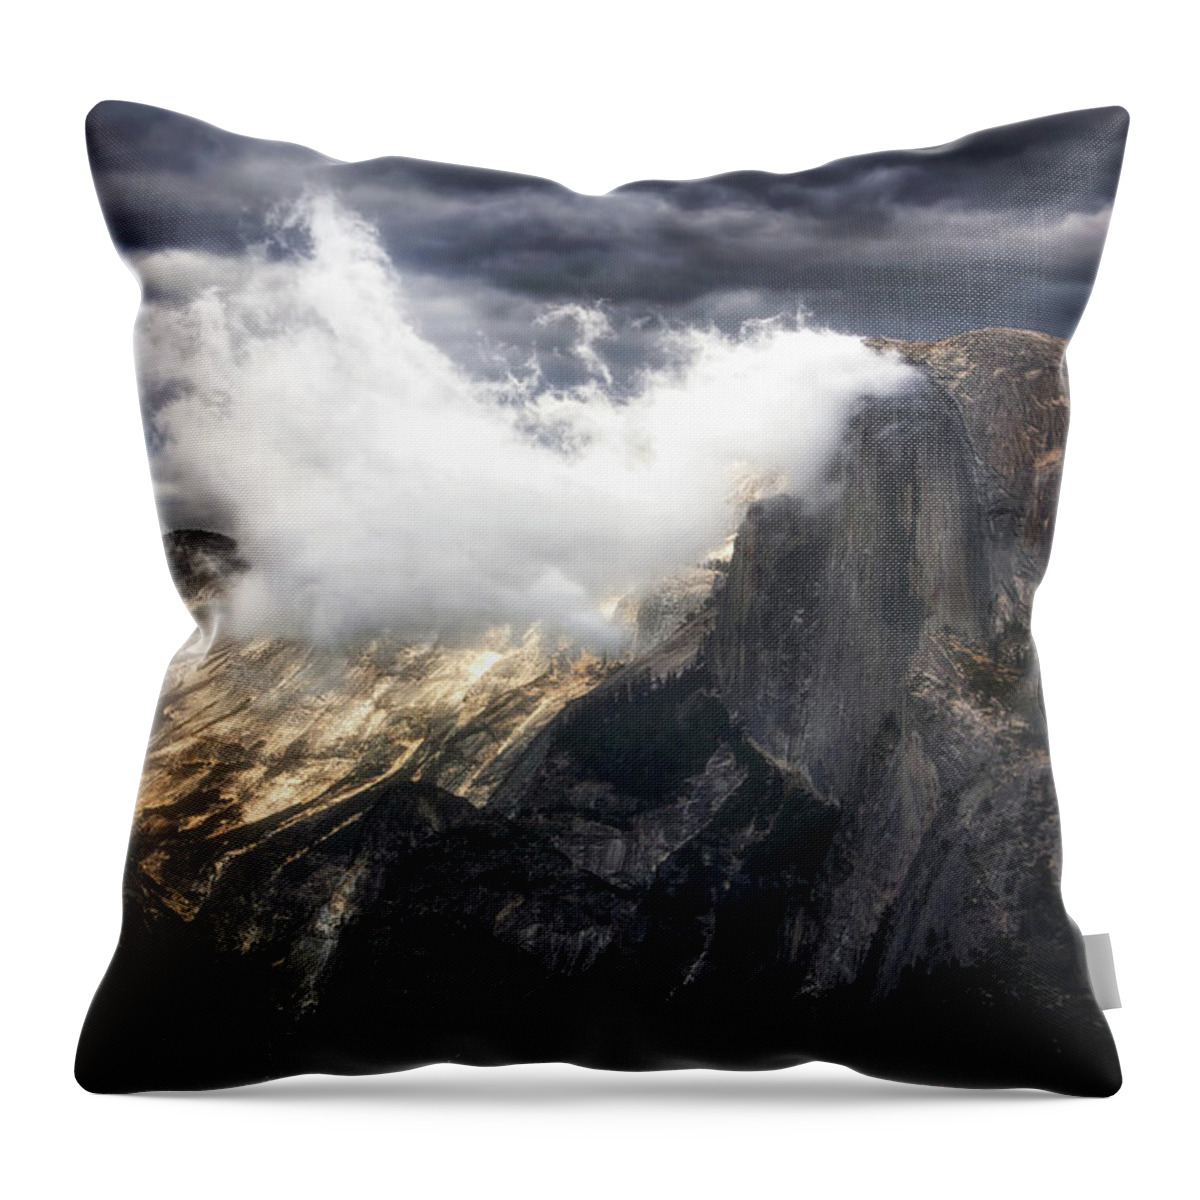 Yosemite California National Park Throw Pillow featuring the photograph Smoked by Nicki Frates